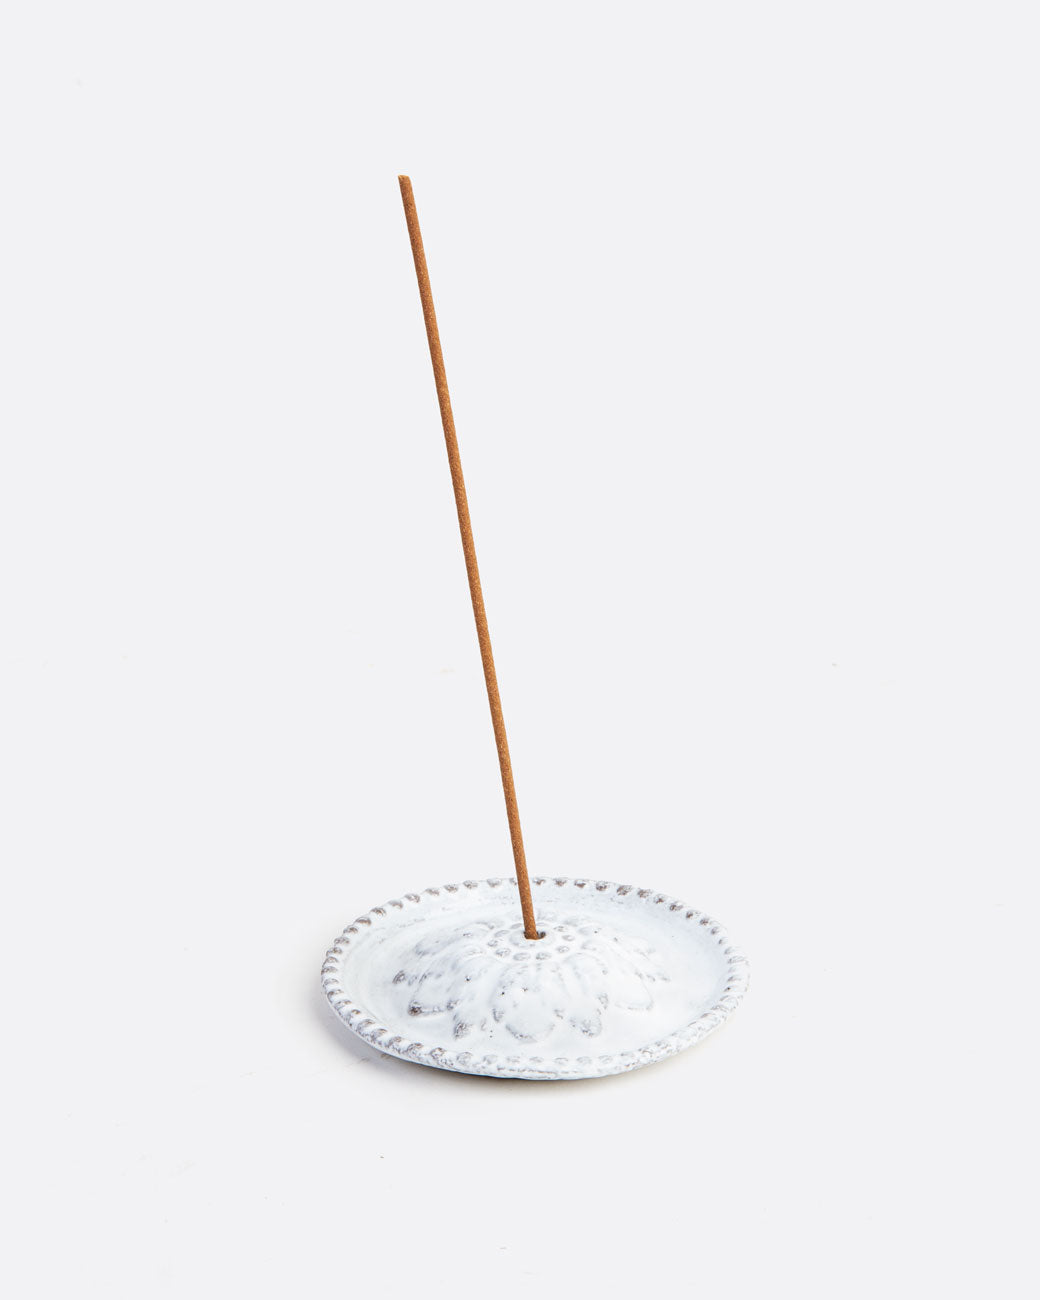 white incense holder with an incense stick in it.